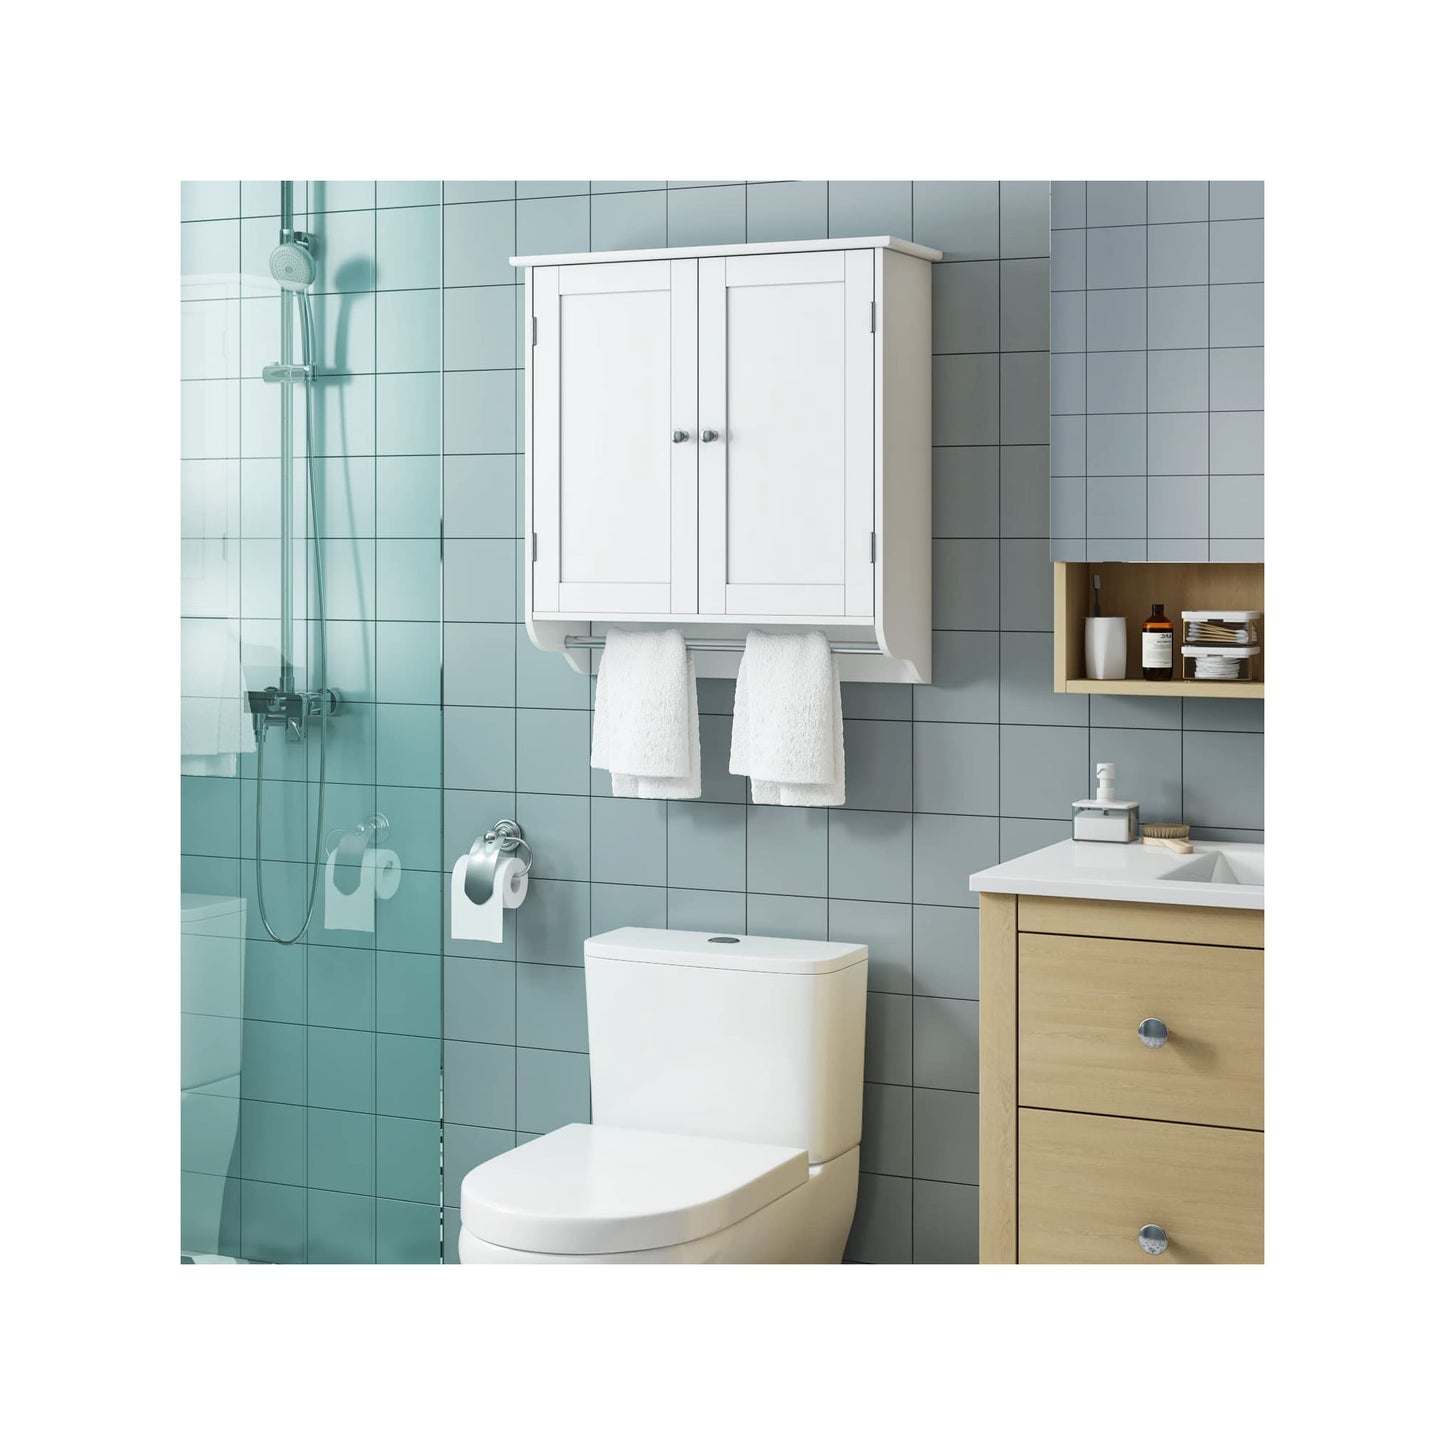 Homfa Bathroom Wall Cabinet, Over The Toilet Storage Cabinet with Double Door Cupboard and Adjustable Shelf and Towels Bar, White